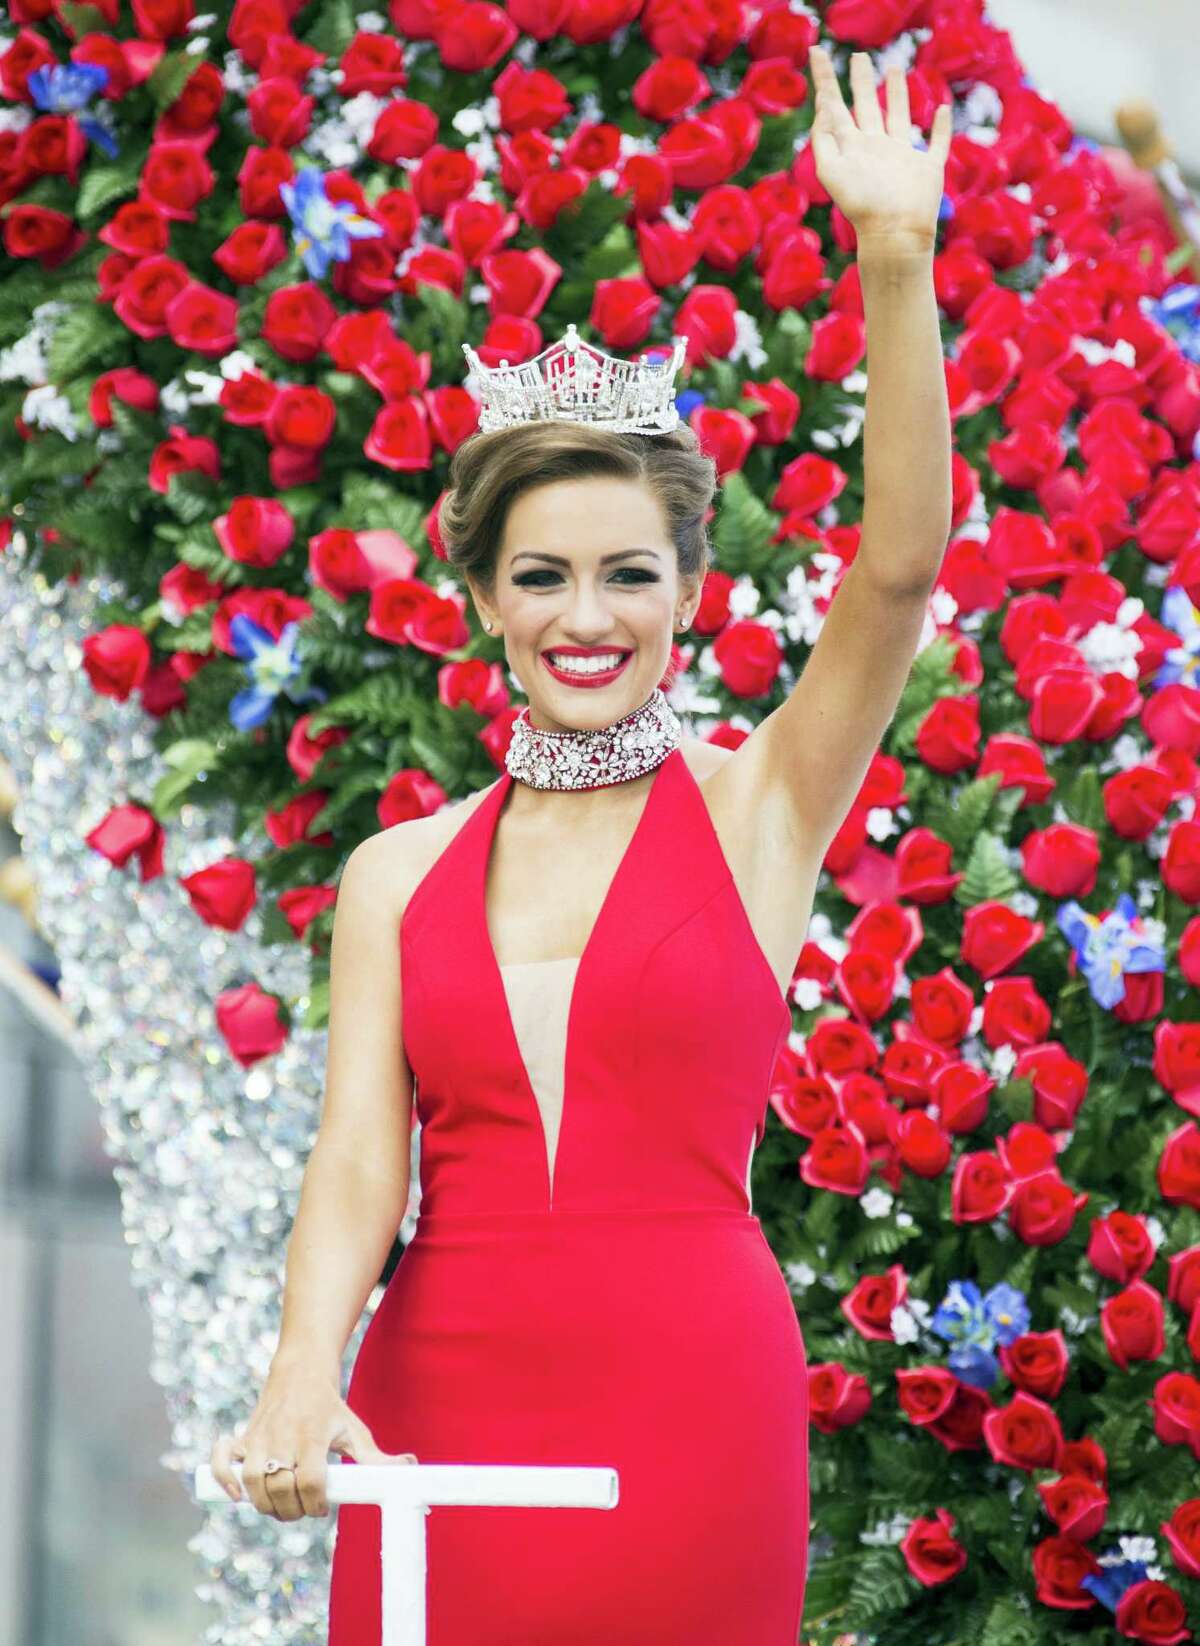 Miss America 2016 Betty Cantrell waves to the crowd during the 2017 Miss America pageant “Show Us Your Shoes” parade on Sept. 10, 2016 in Atlantic City.